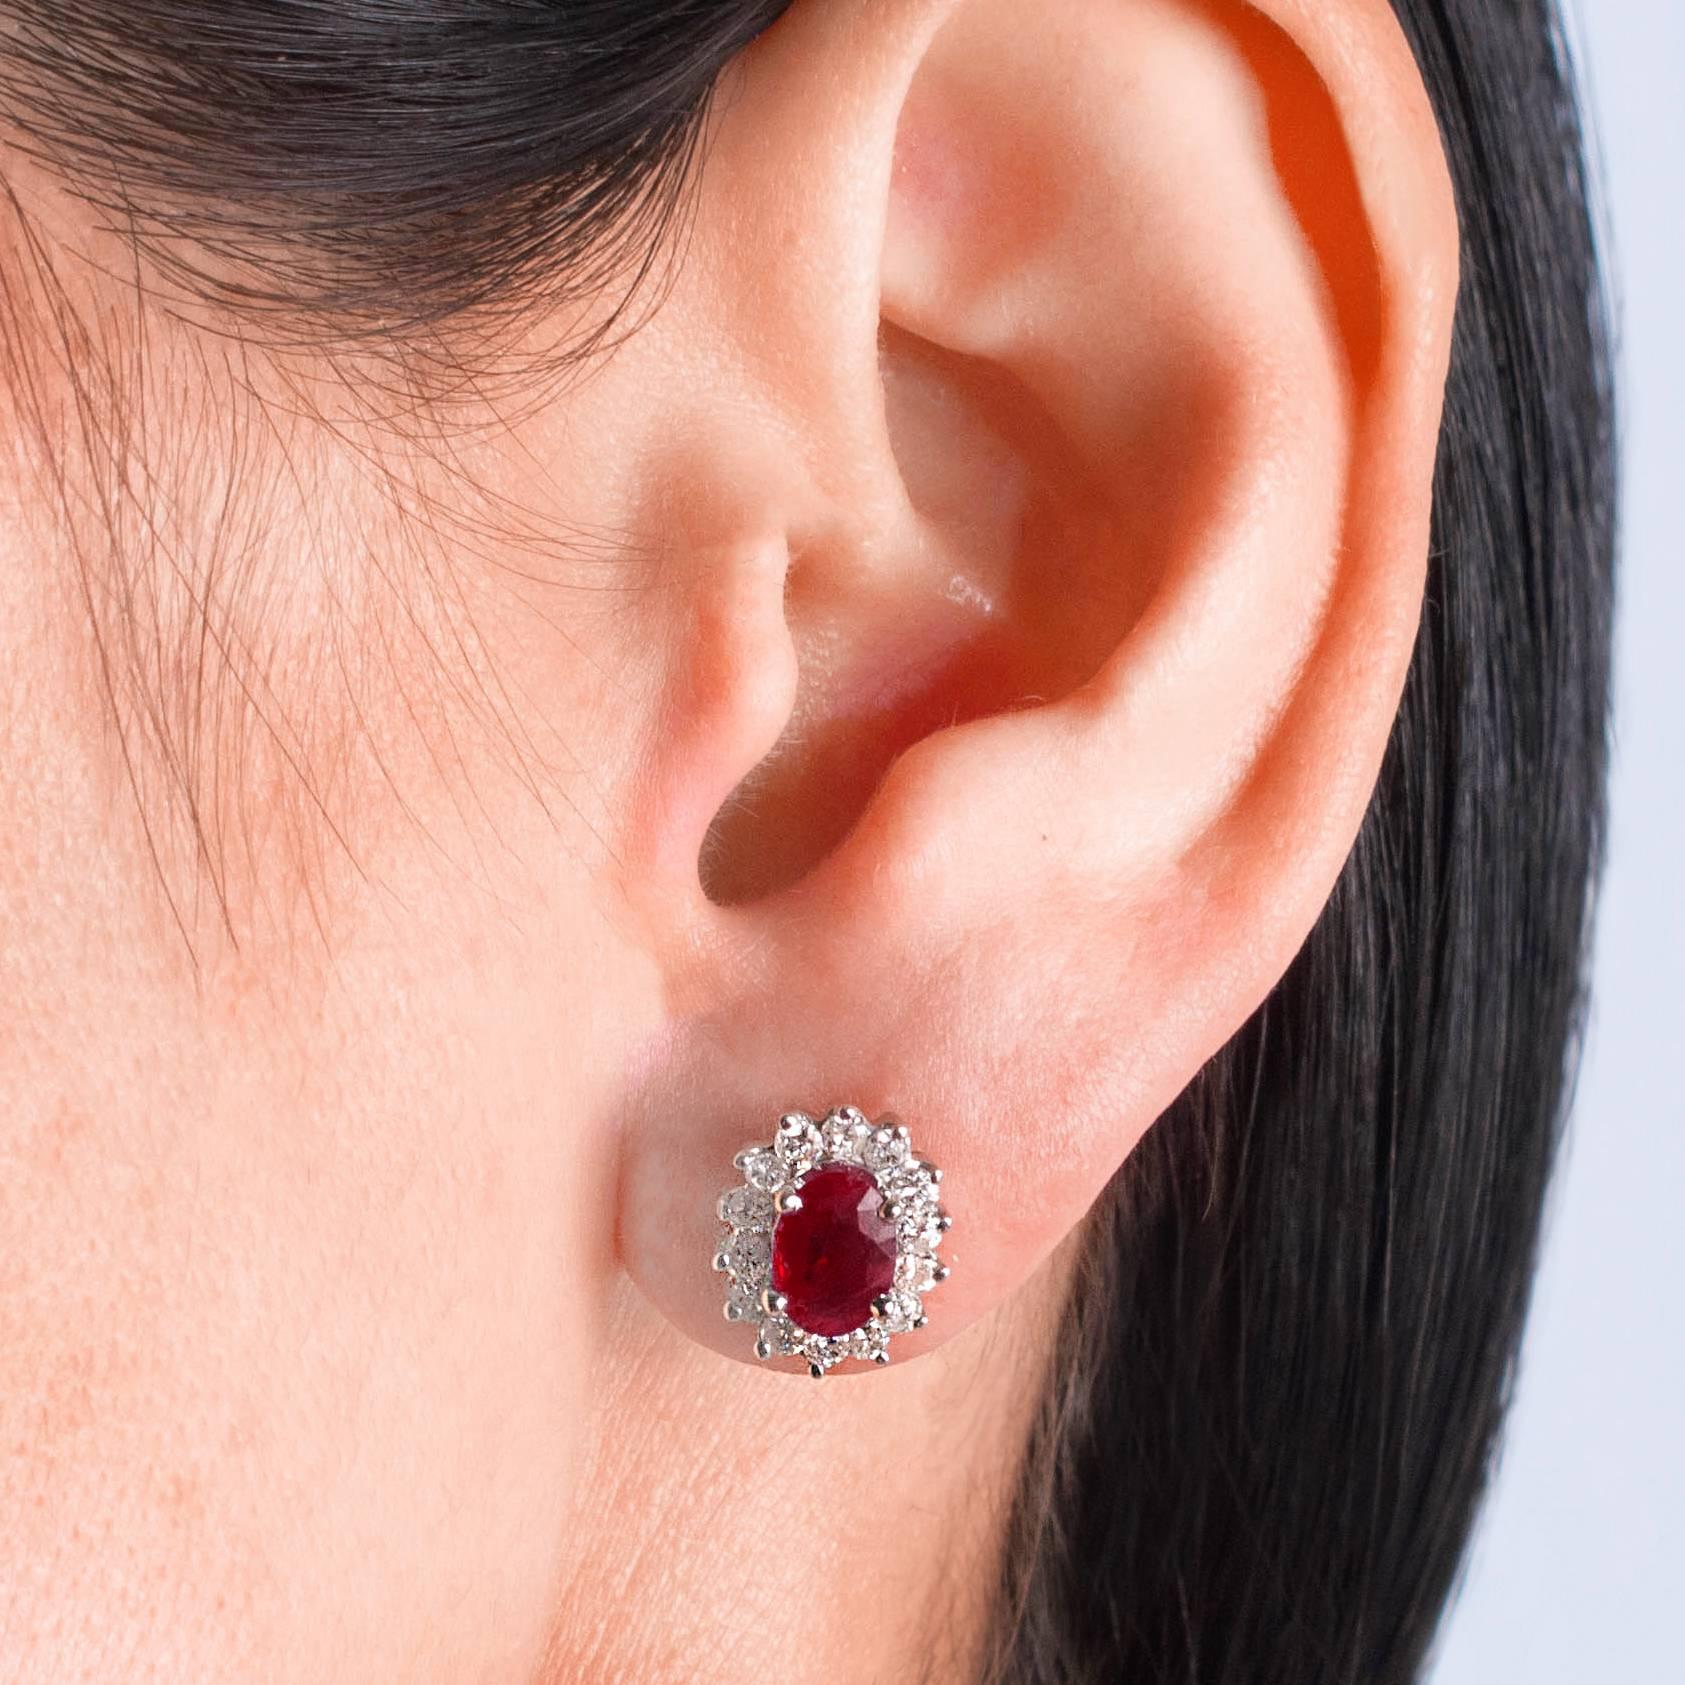 These Ruby and Diamond earrings are timeless. The oval cut Rubies are set in the Princess form surrounded with Diamonds. Gorgeous on the ears!

The Rubies are red, oval cut and faceted and surrounded with beautiful round,  Brilliant cut Diamonds set